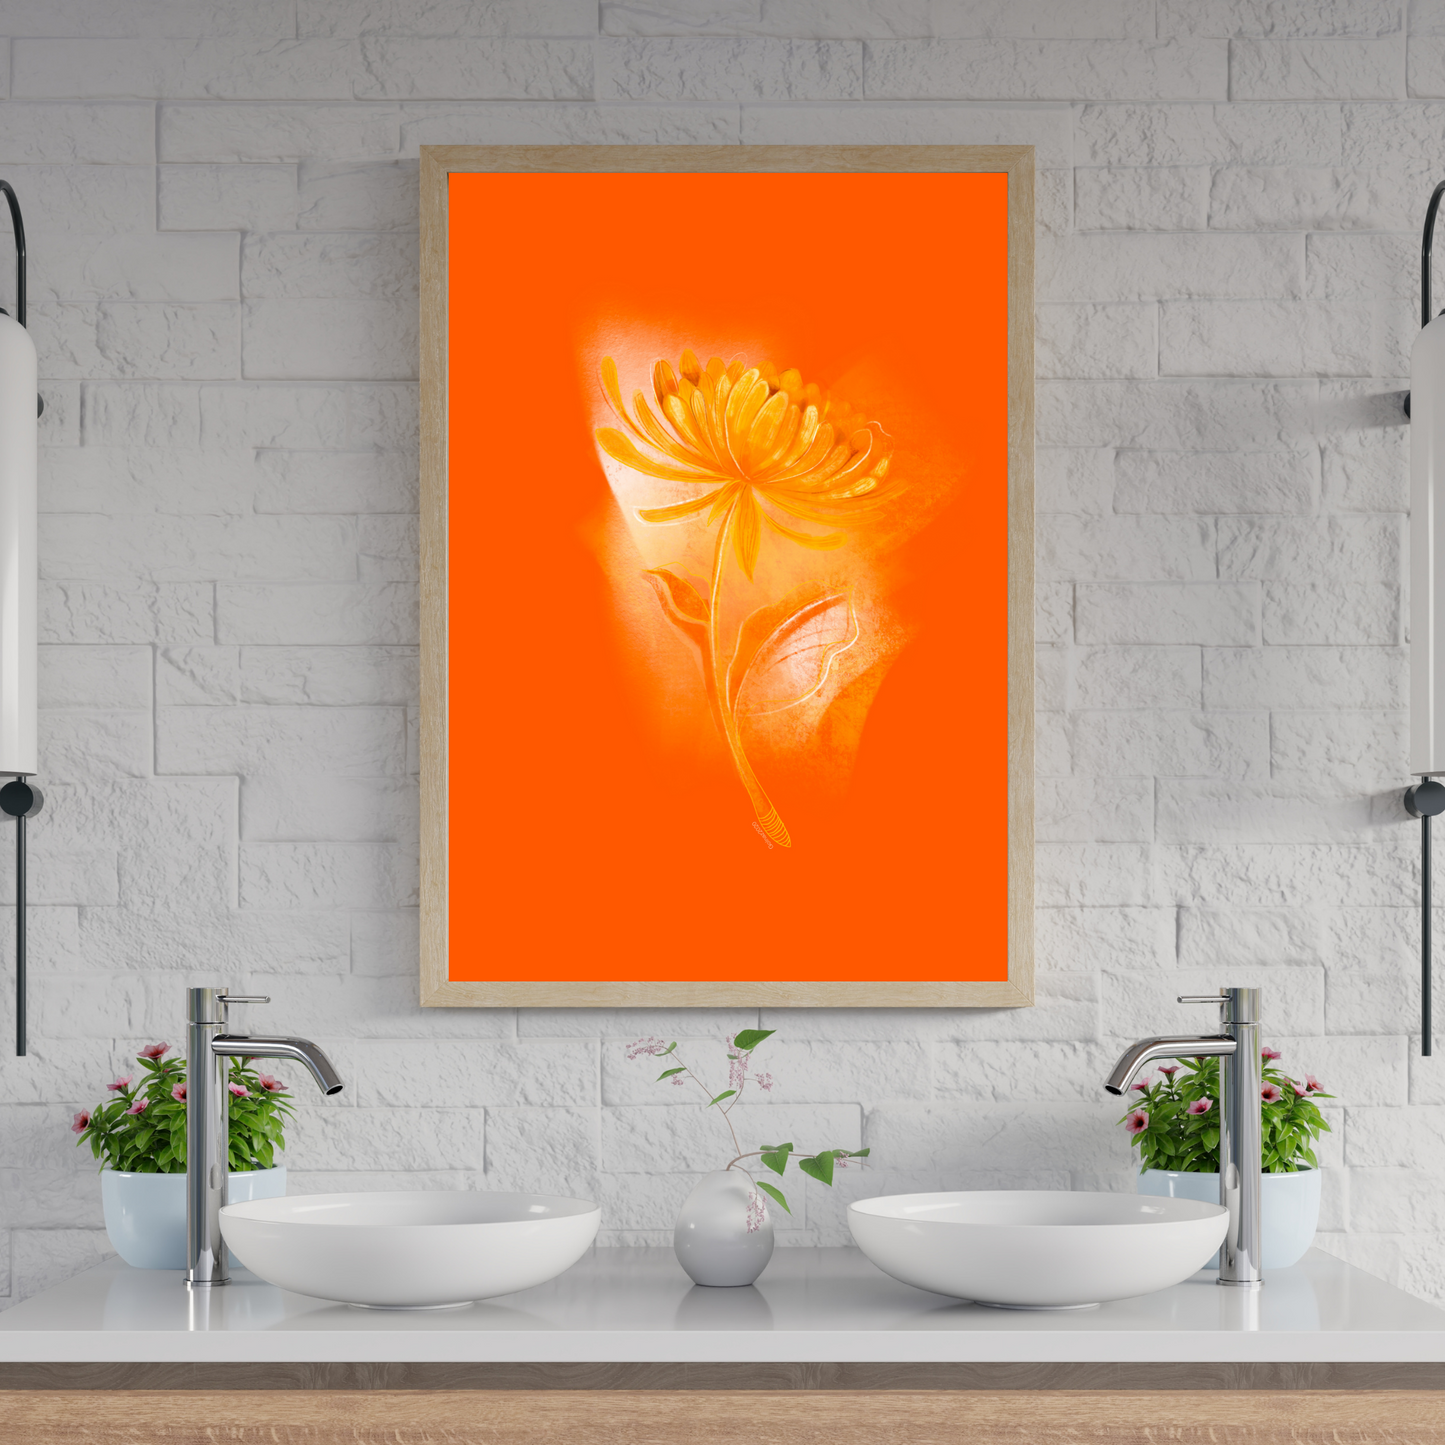 An example of the Morning Chrysanthemum by ArisaTeam in a bathroom